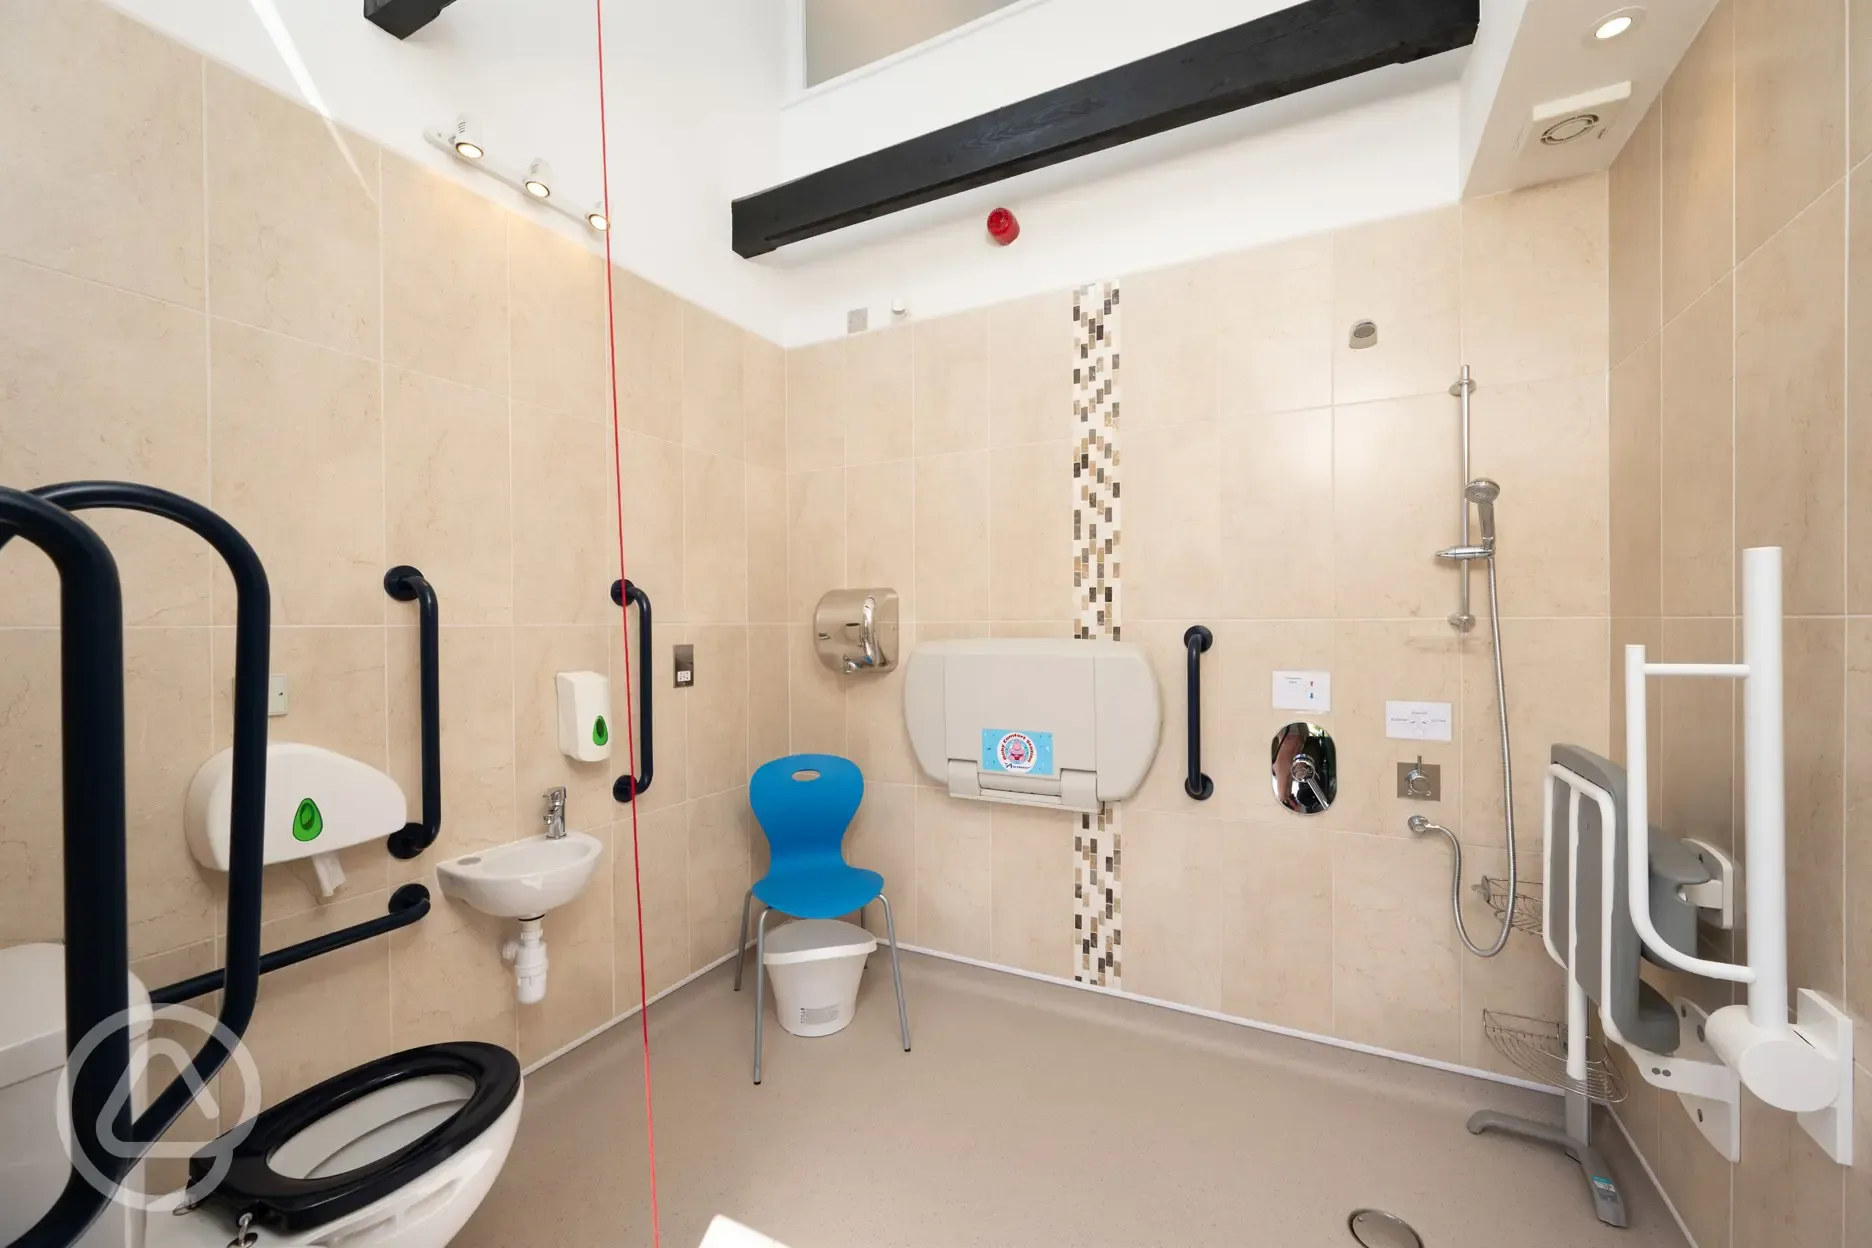 Accessible toilets and showers